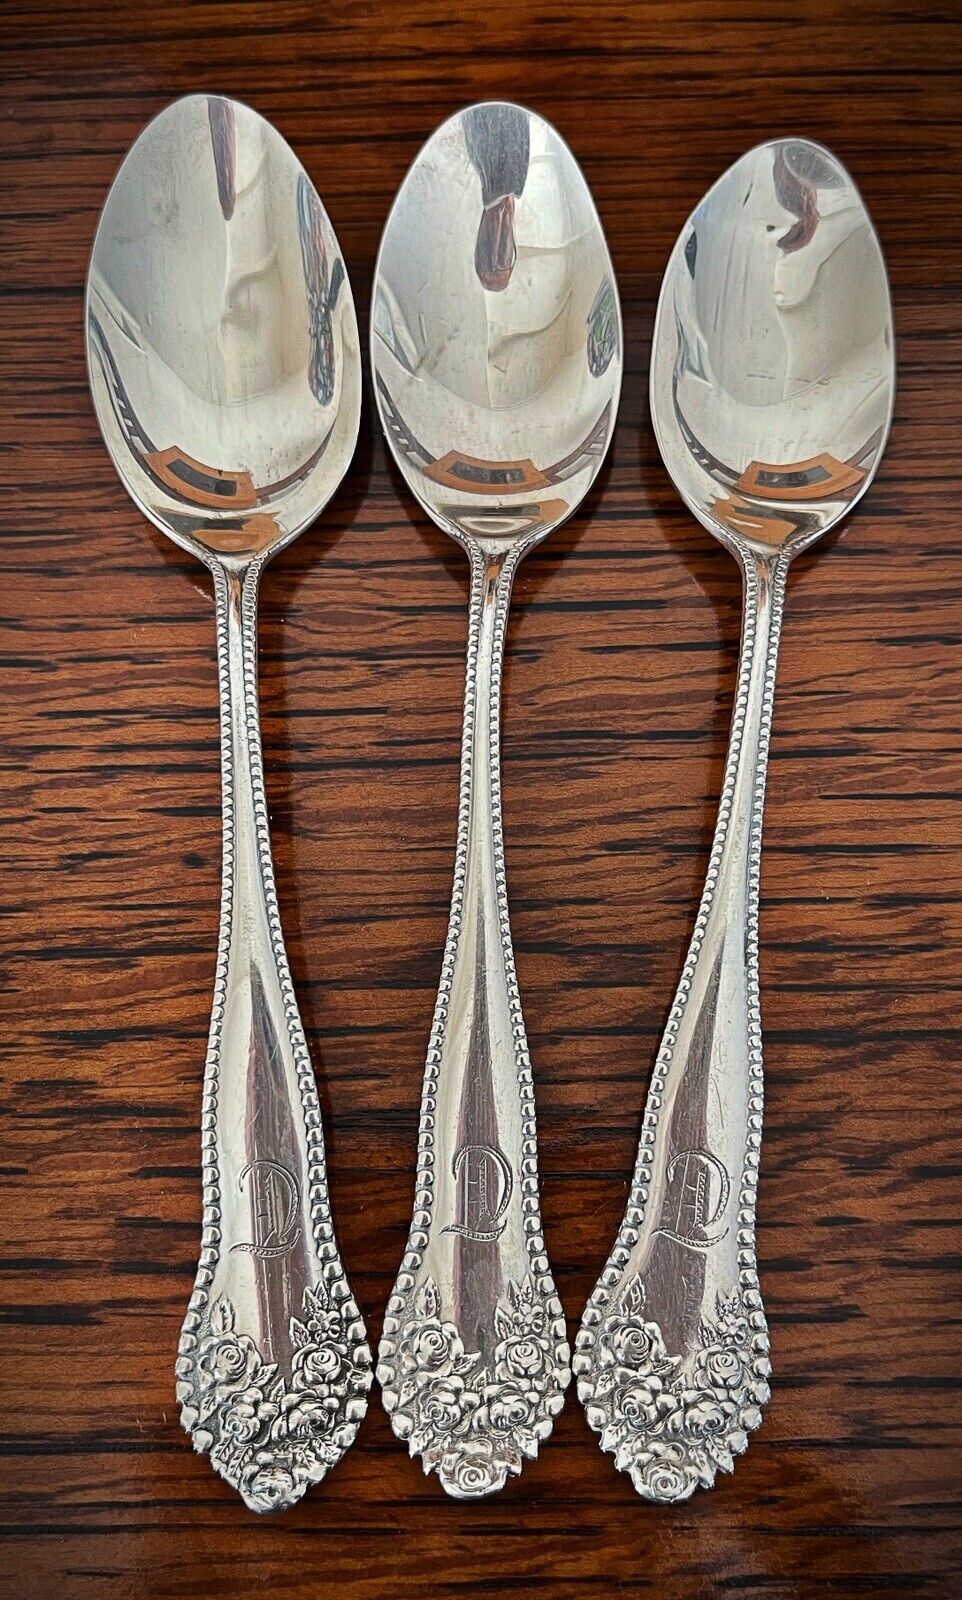 3 Collector Antique Sterling Silver Gorham 5 5/8” Teaspoons - E D SPANGLE